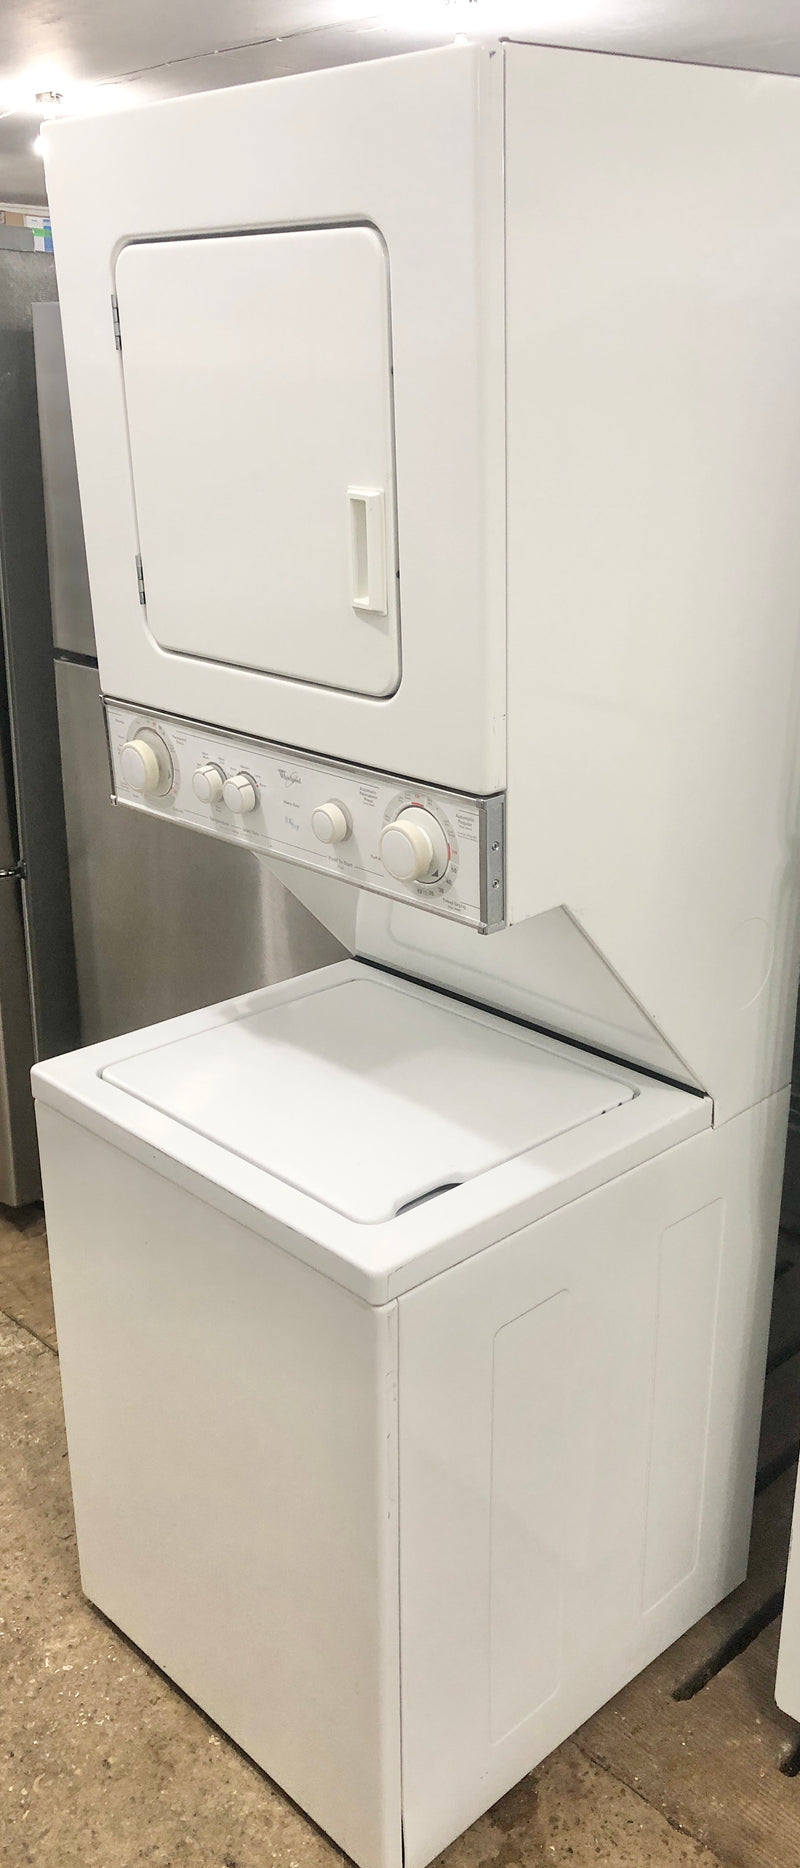 Whirlpool 24" Wide Apartment Size White (Laundry Centre), Stacker, Washer and Dryer, Free 60 Day Warranty